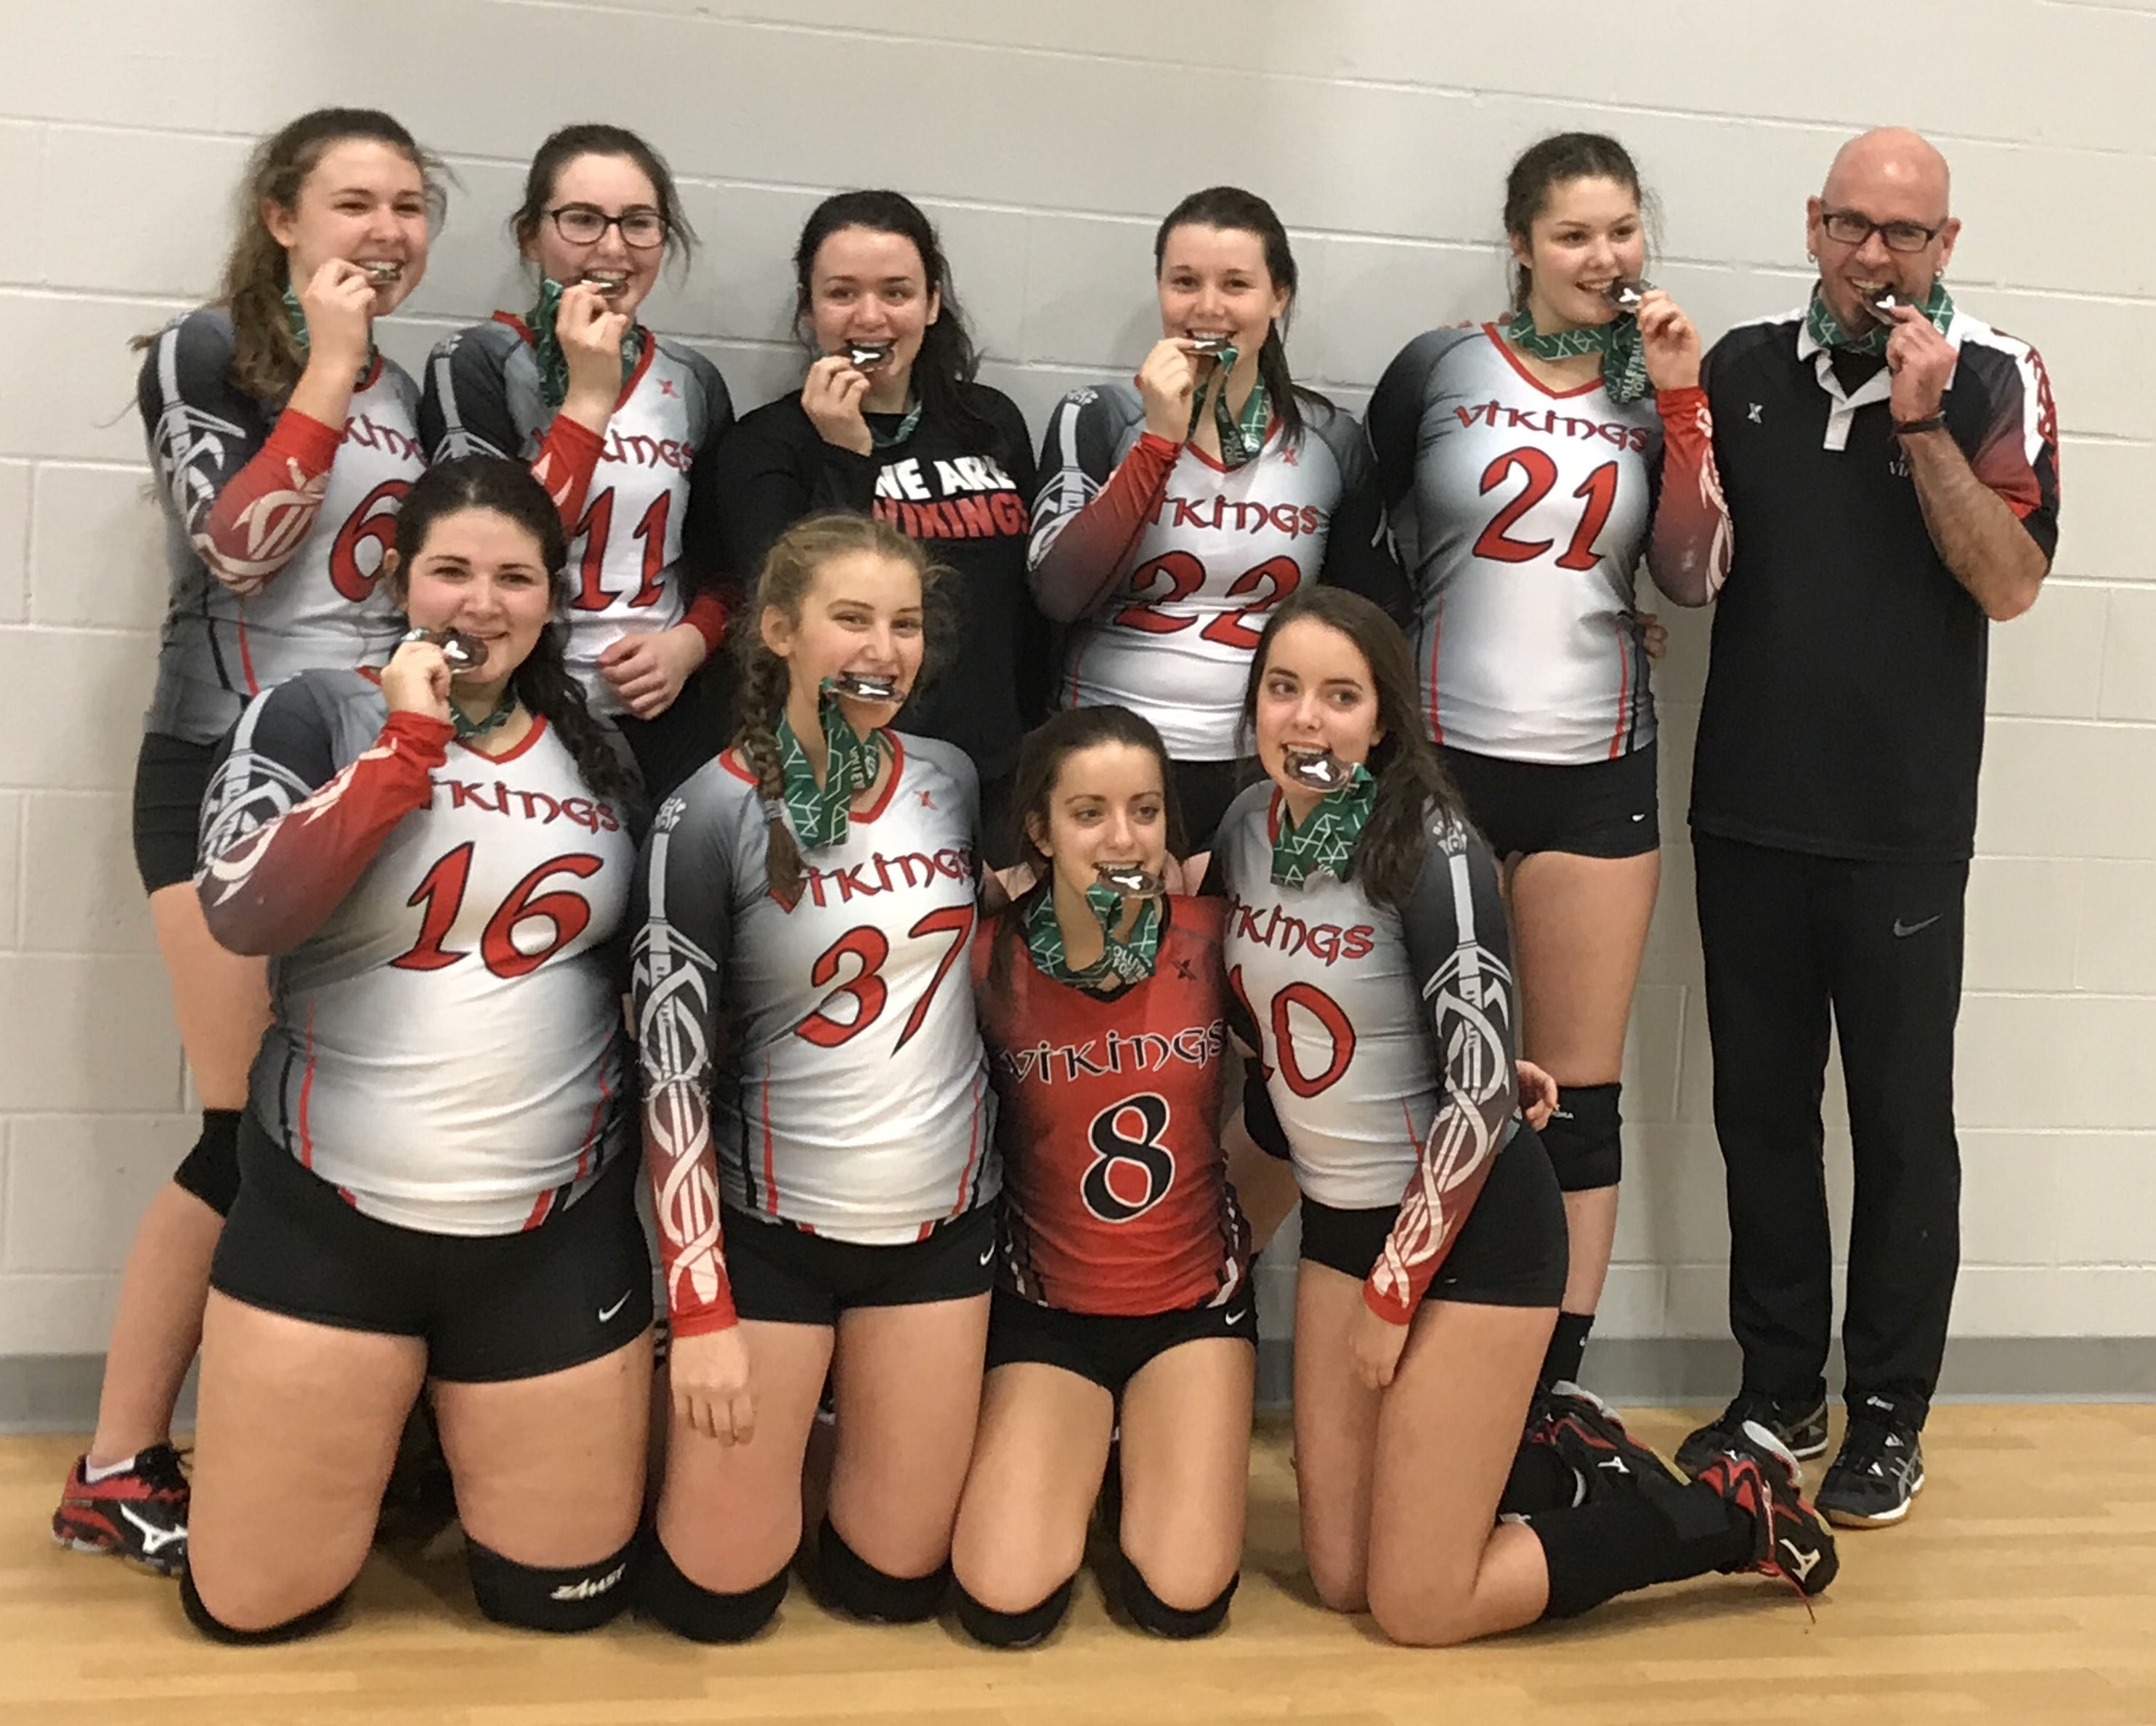 About | Ottawa Valley Vikings Volleyball Club